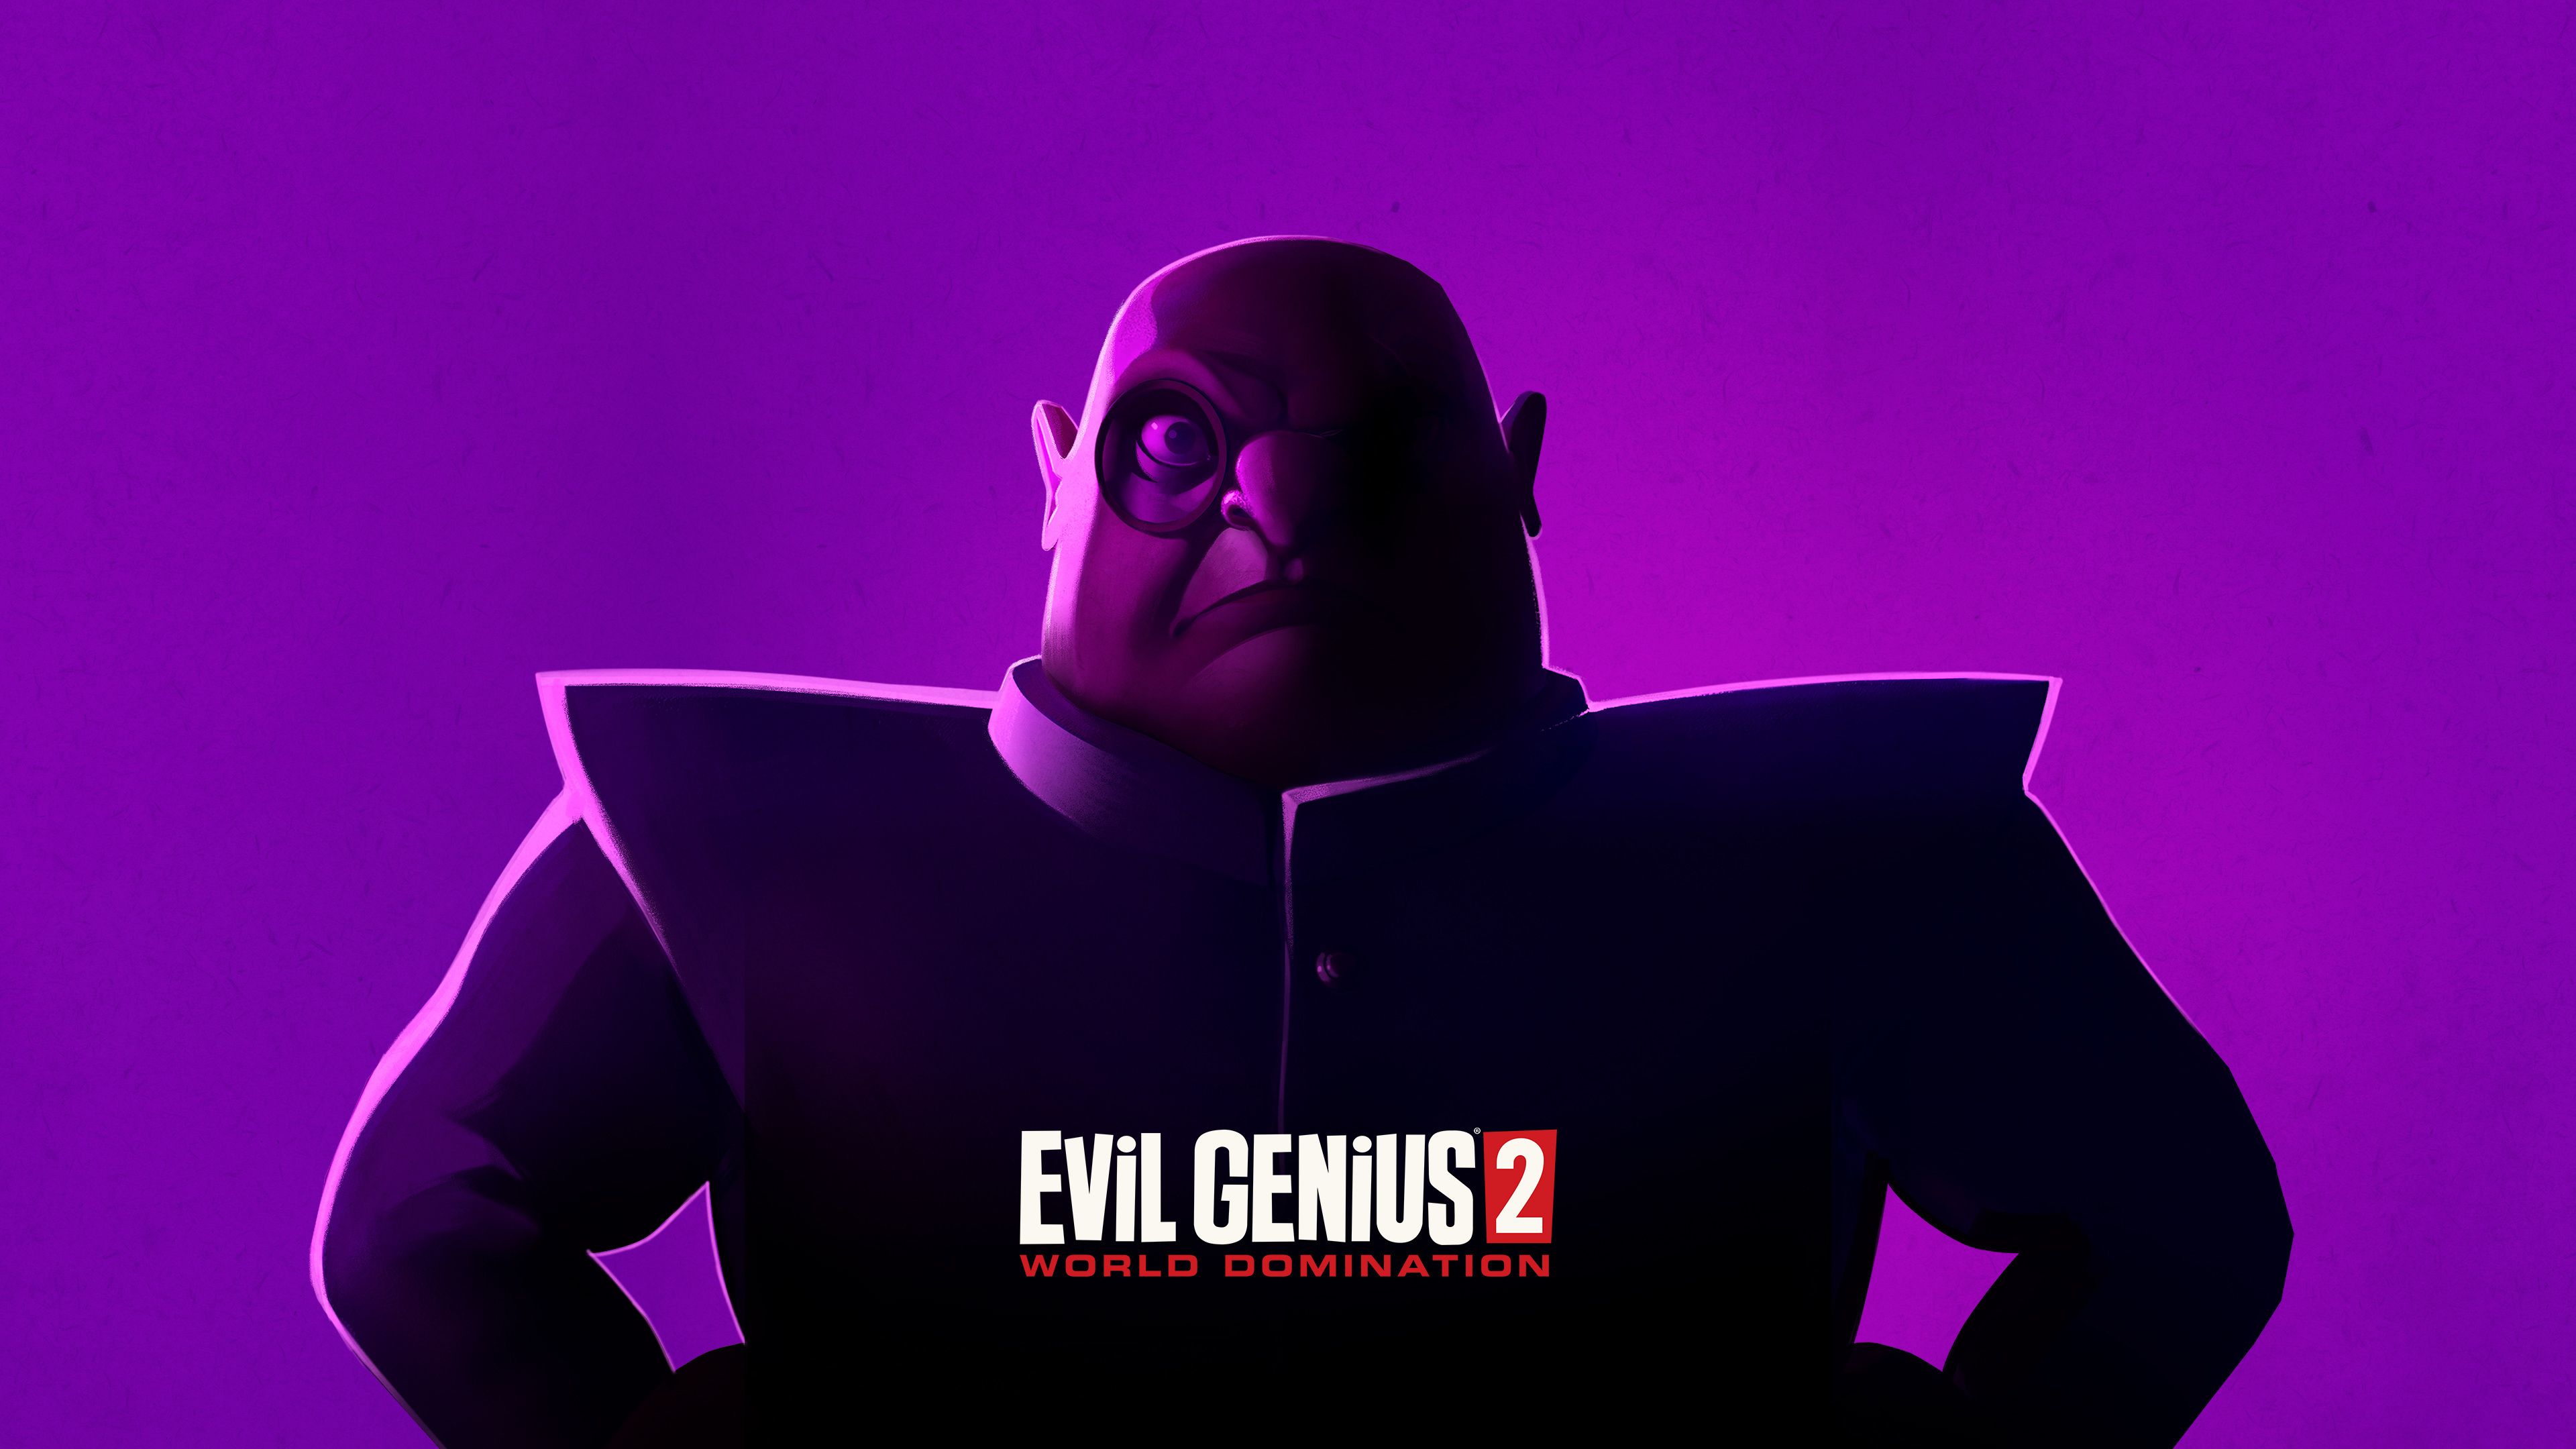 Evil Genius 2 HD Games, 4k Wallpaper, Image, Background, Photo and Picture